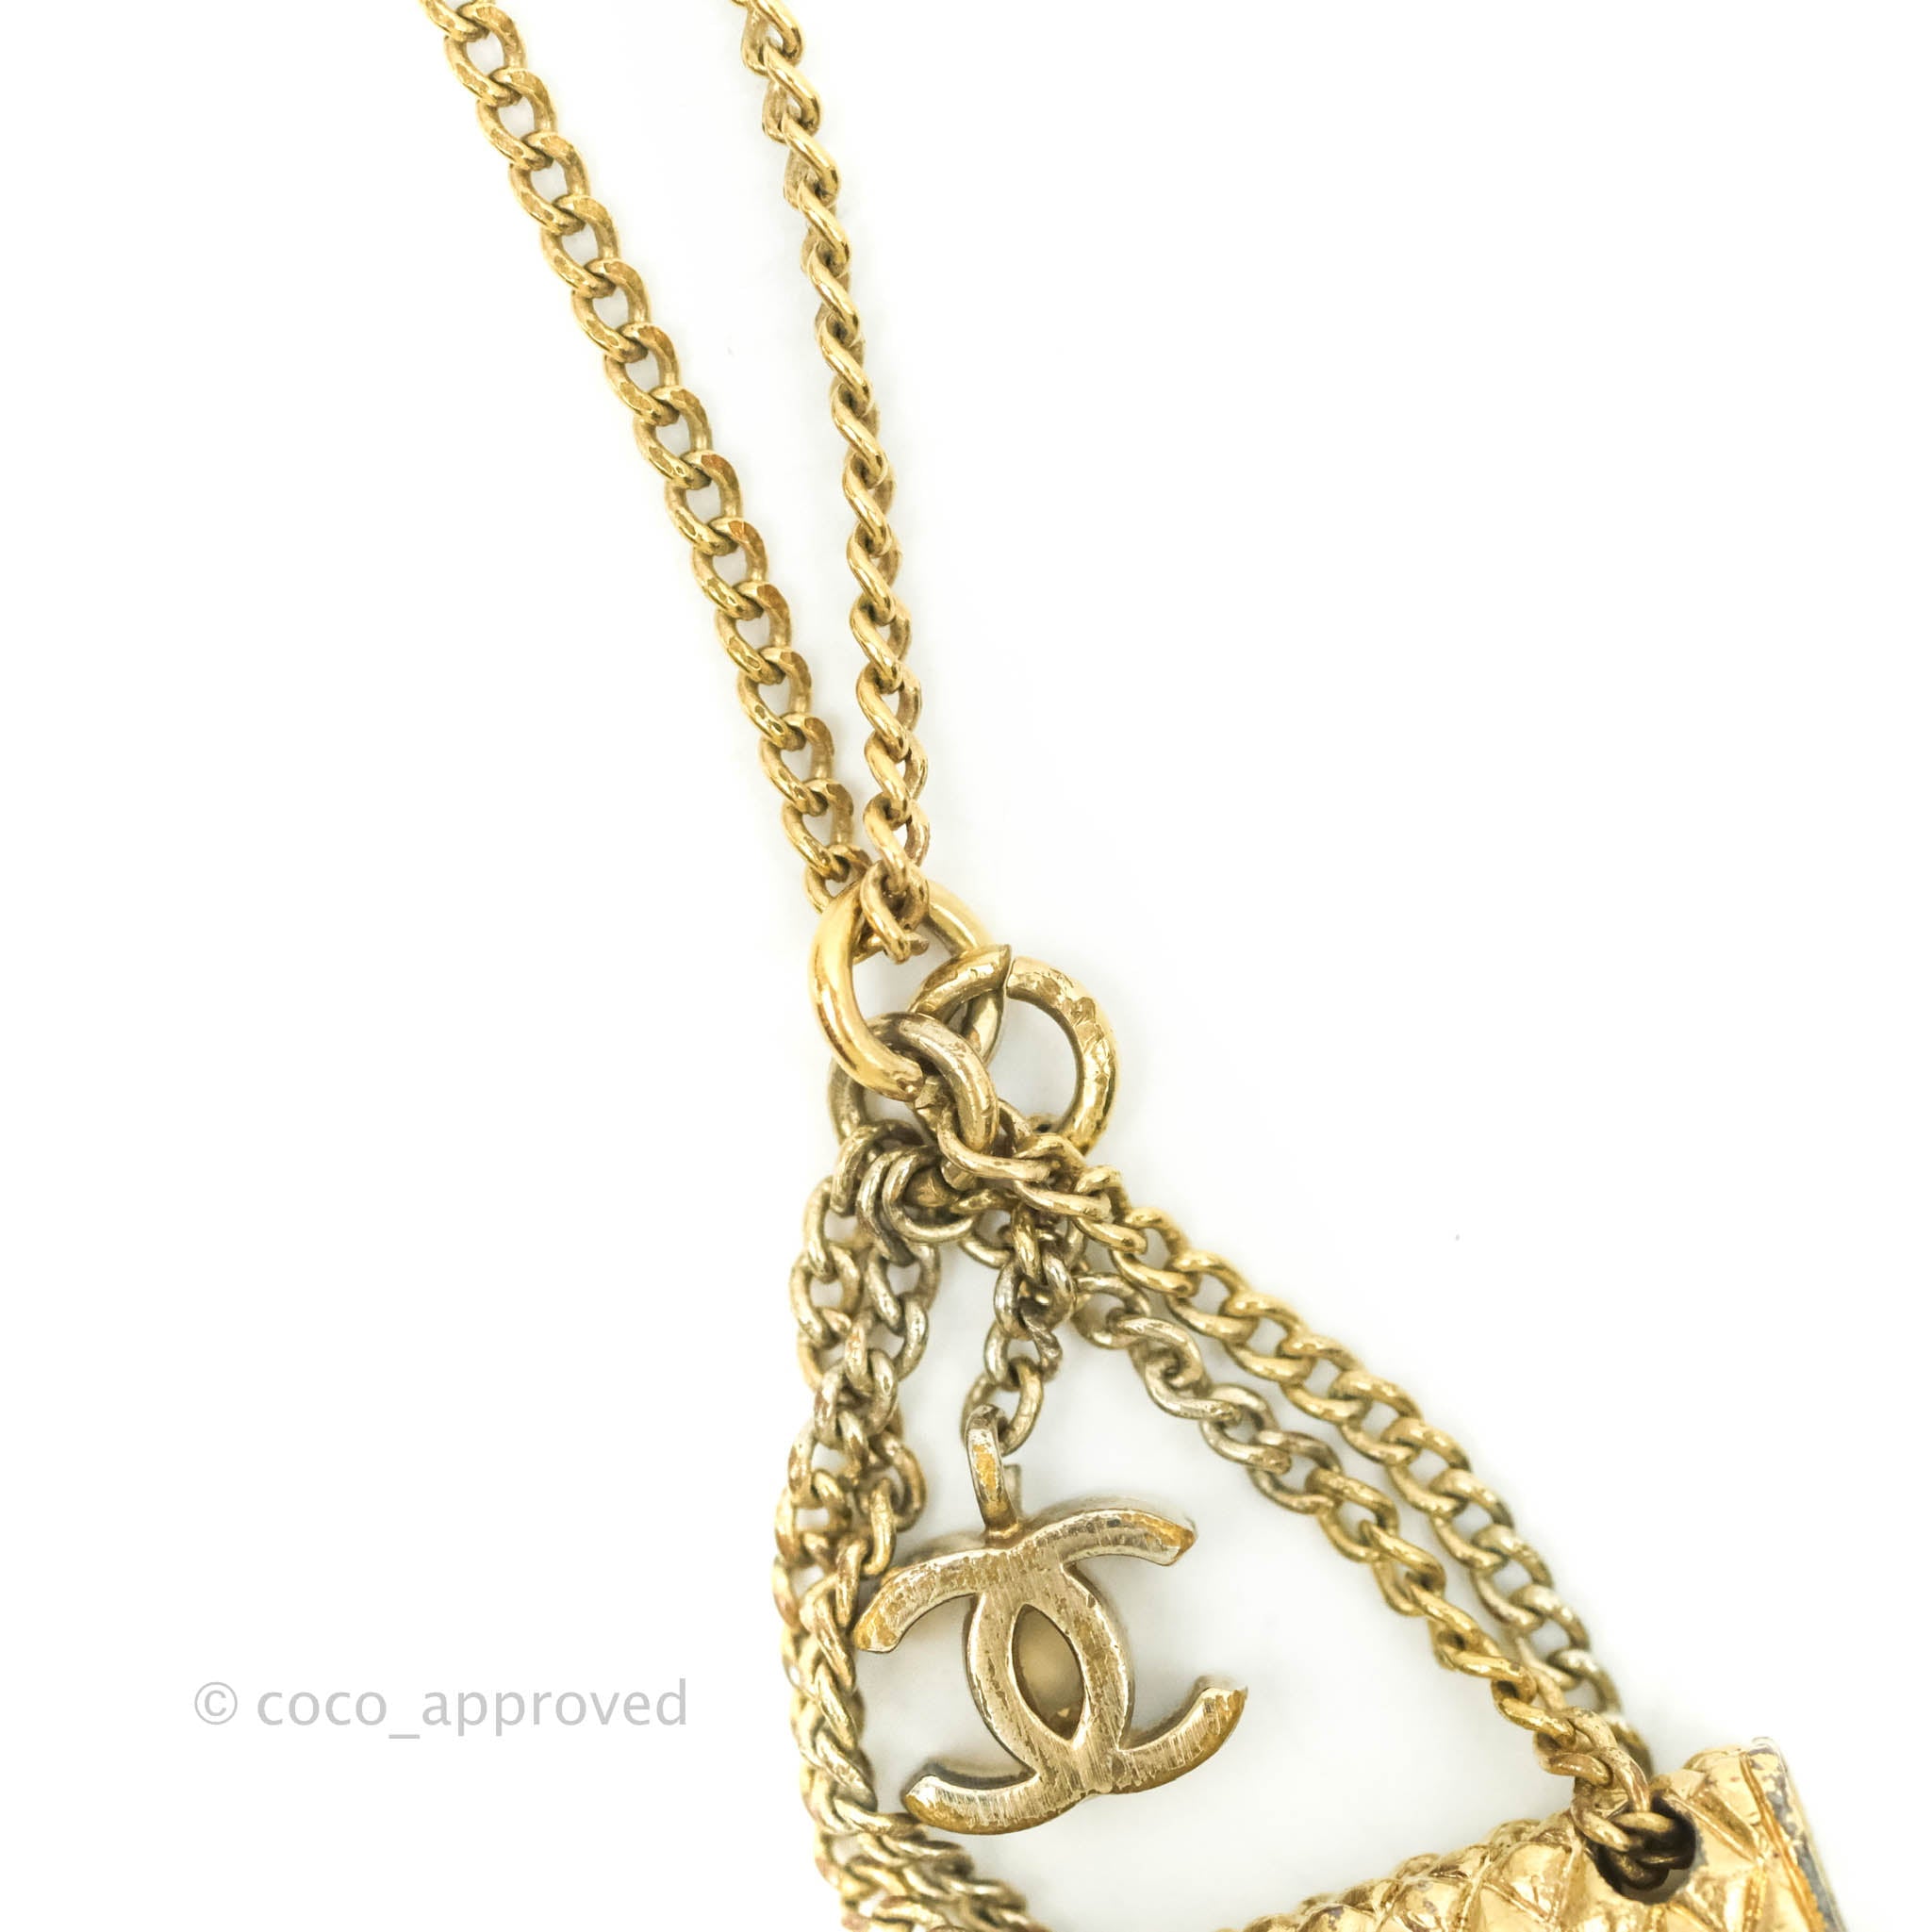 Chanel Flap Bag CC Pendant Necklace Gold Tone 05A – Coco Approved